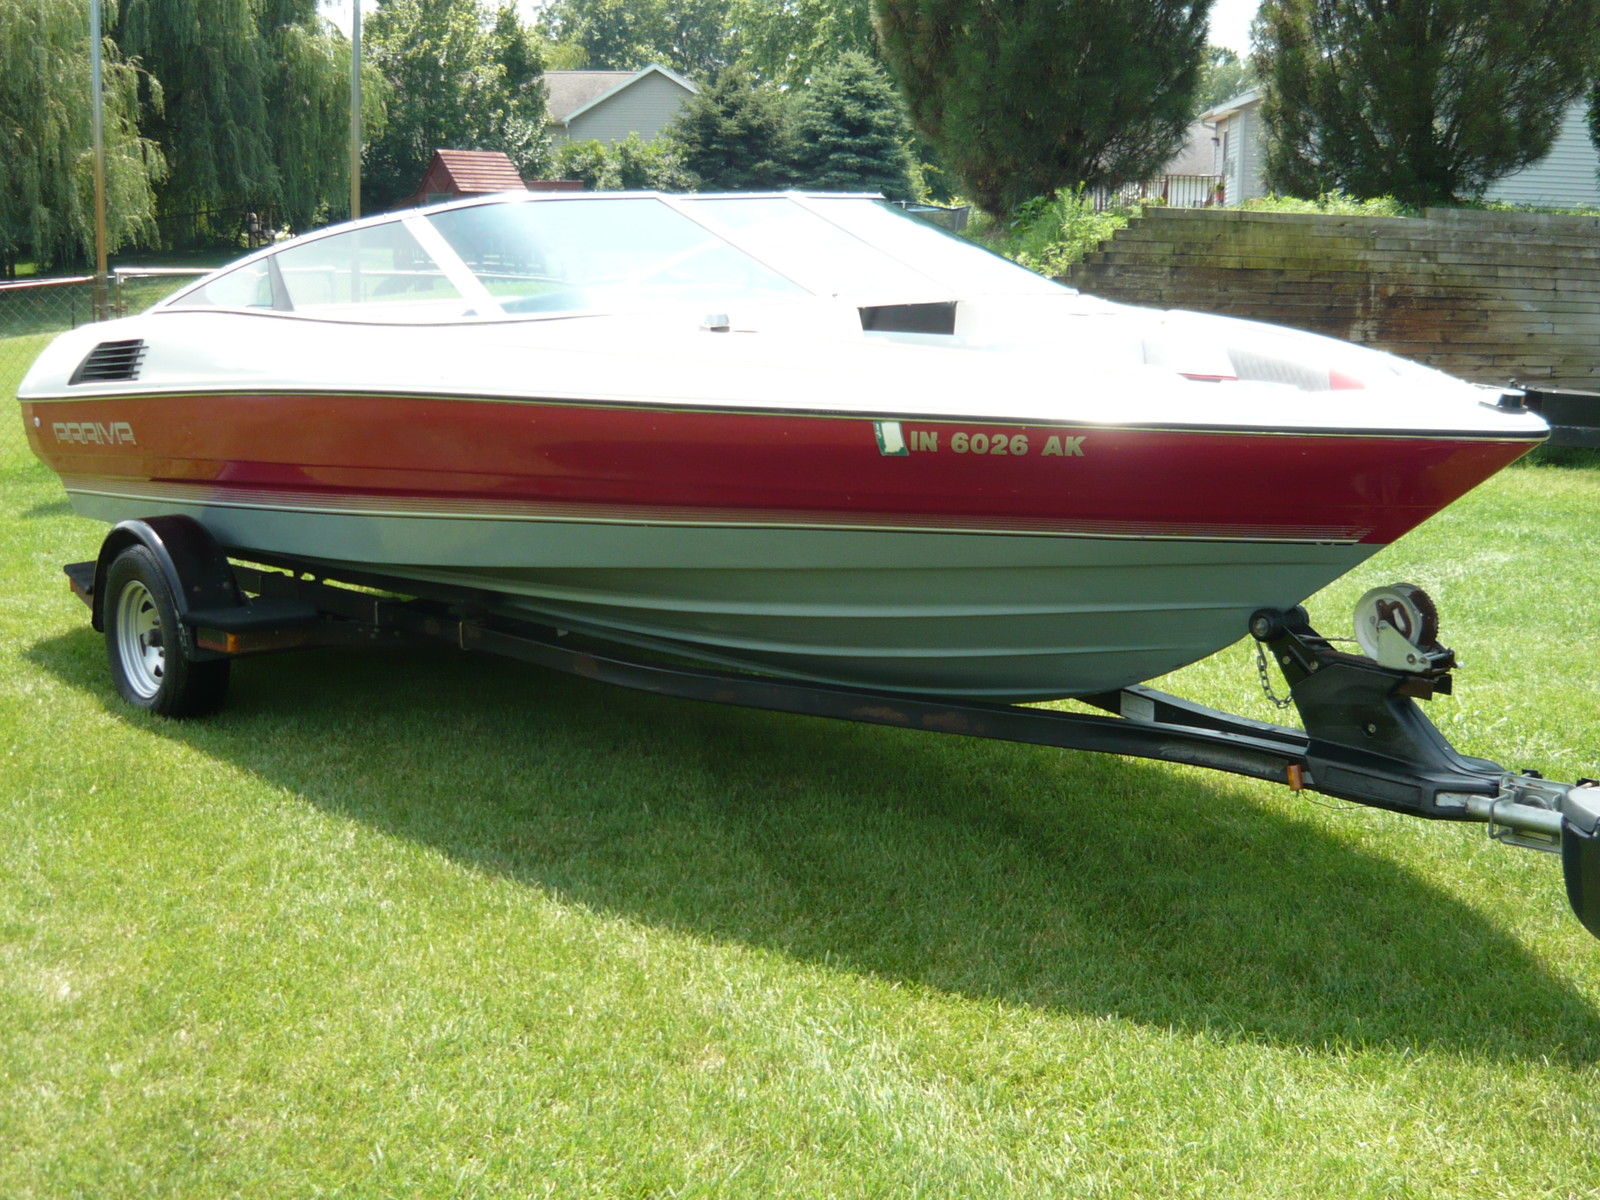 Arriva 2050 1989 for sale for $4,800 - Boats-from-USA.com